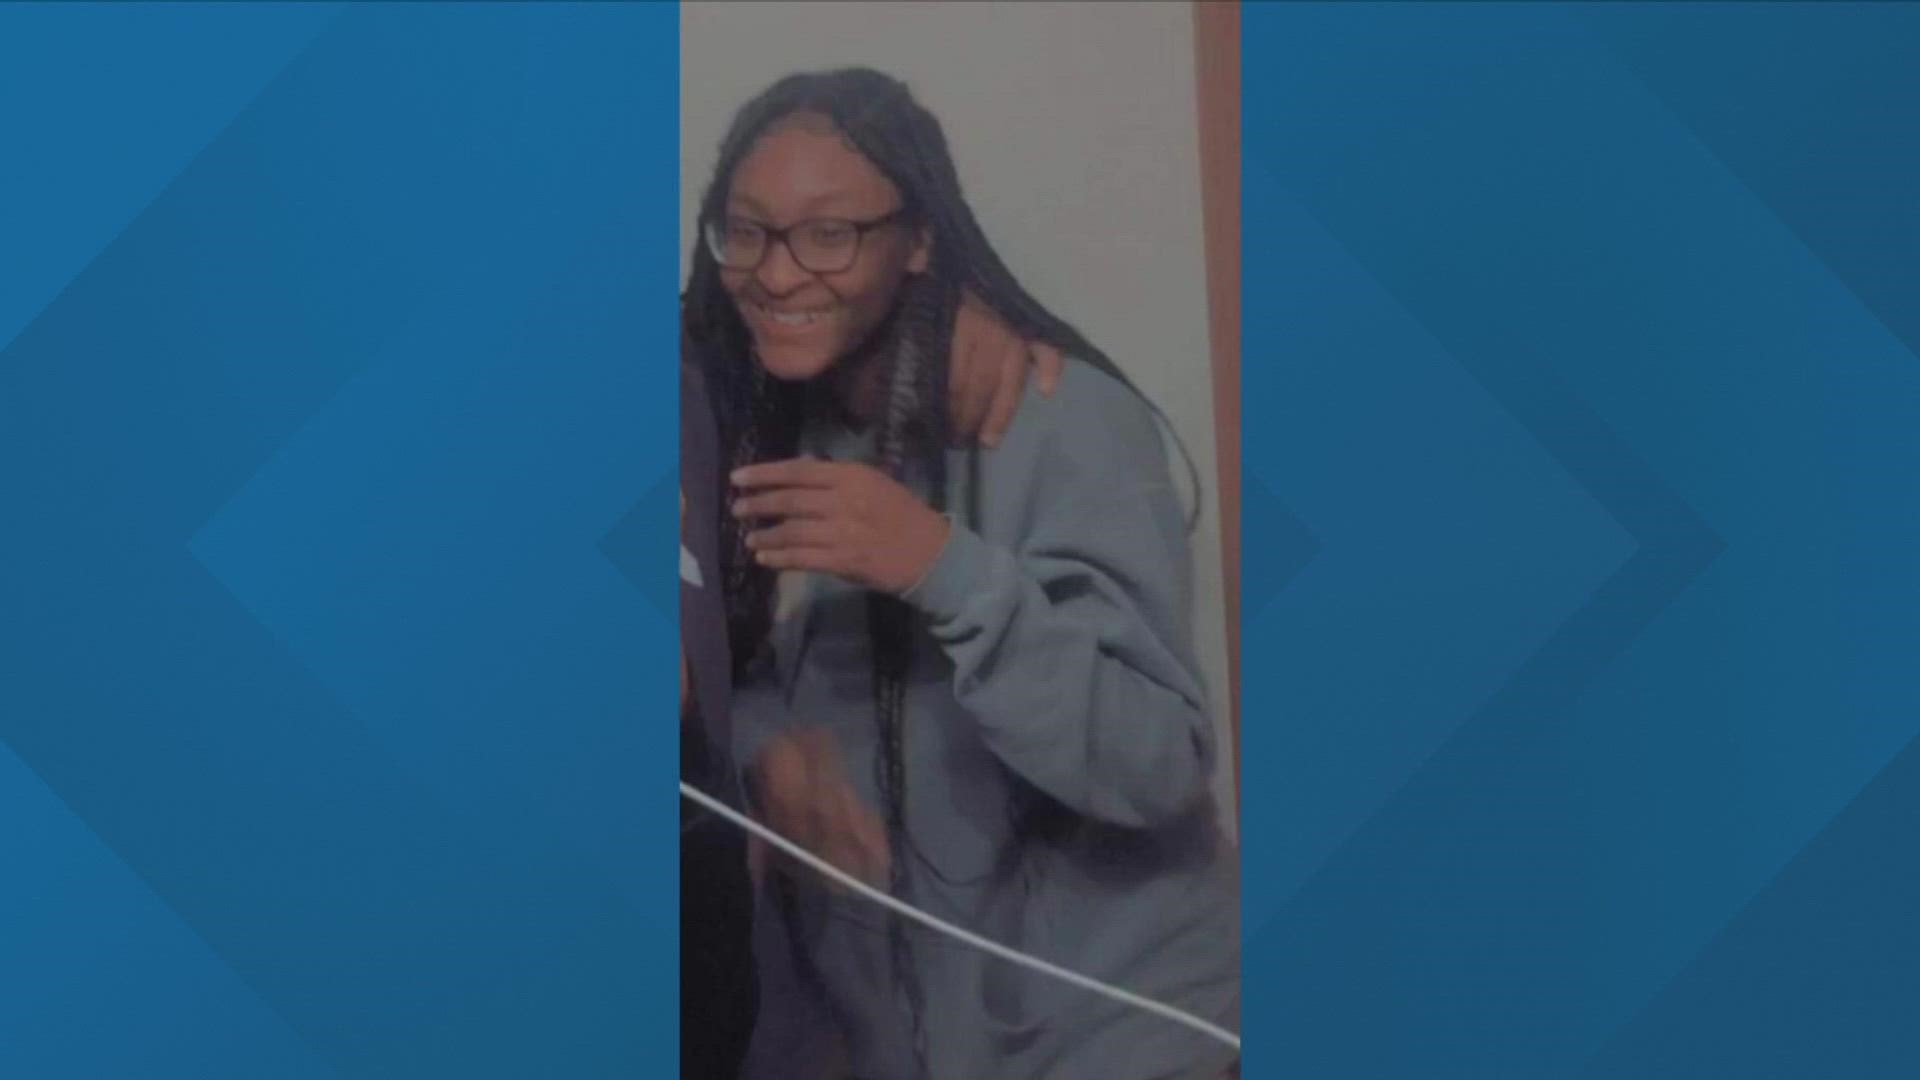 Family friends of Unique Pratter are seeking justice for the death of the 15-year-old and said she will not become another statistic.